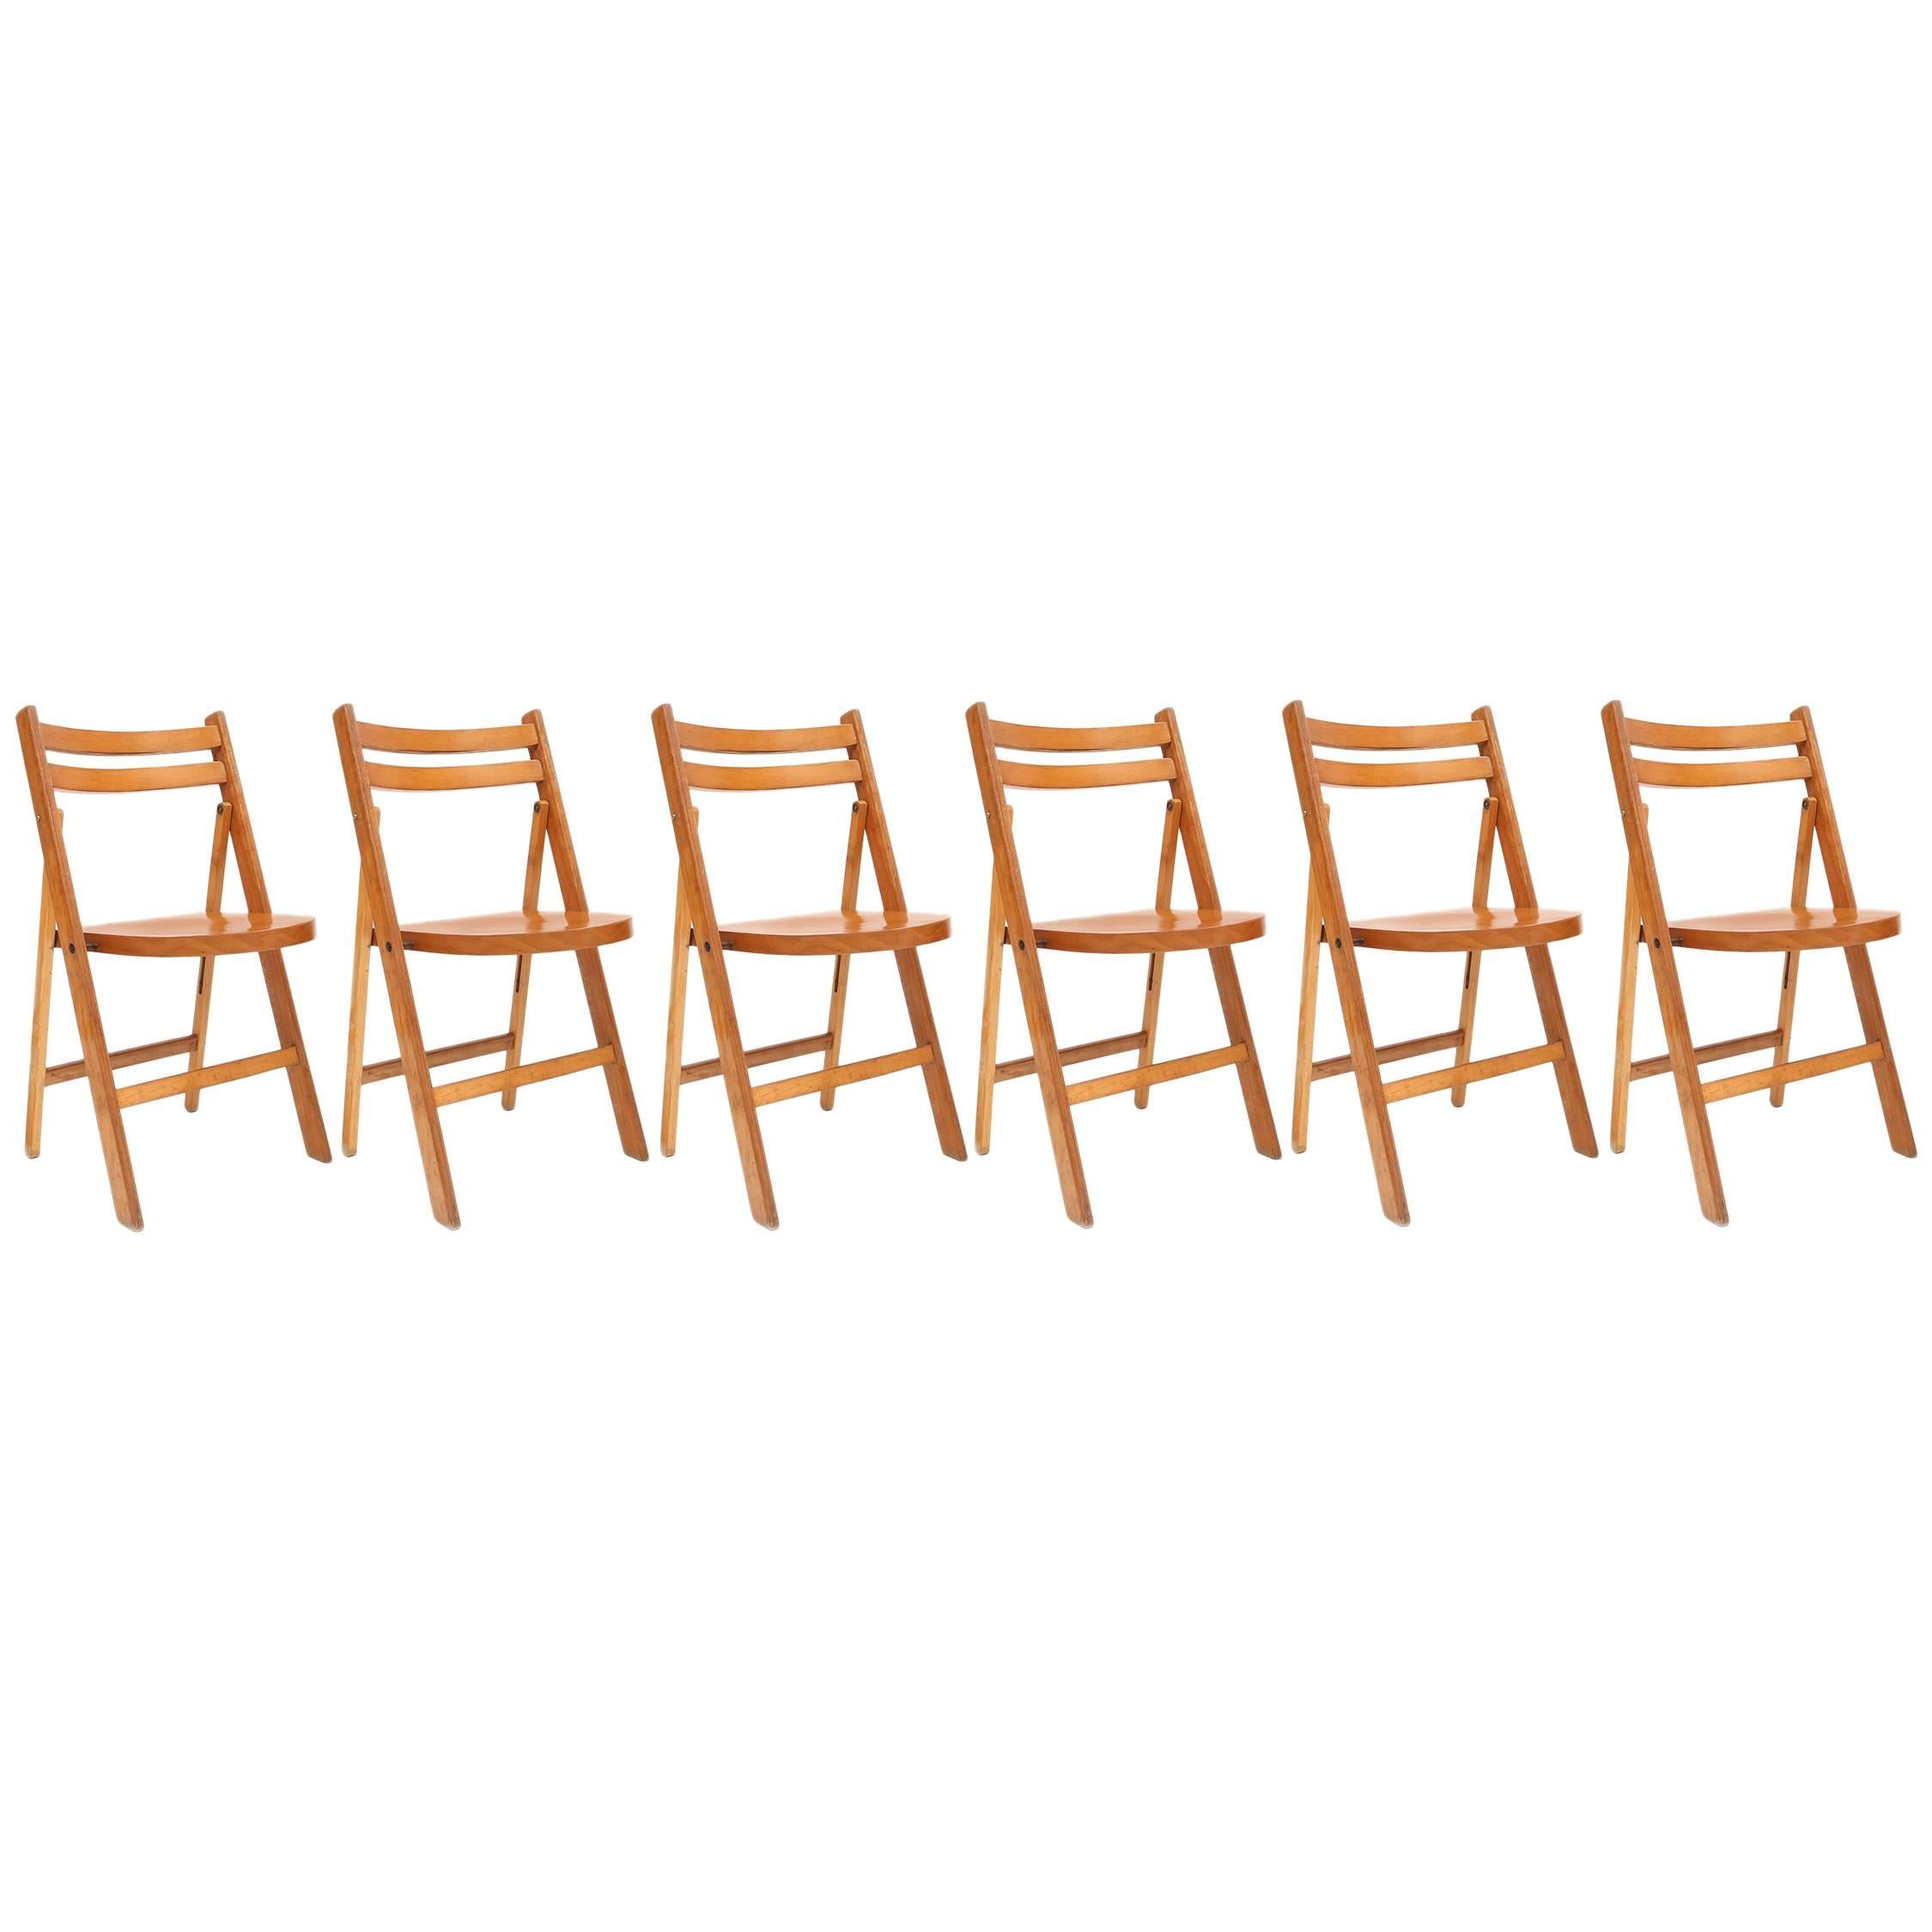 Mid-century modern vintage wooden stackable folding chairs For Sale